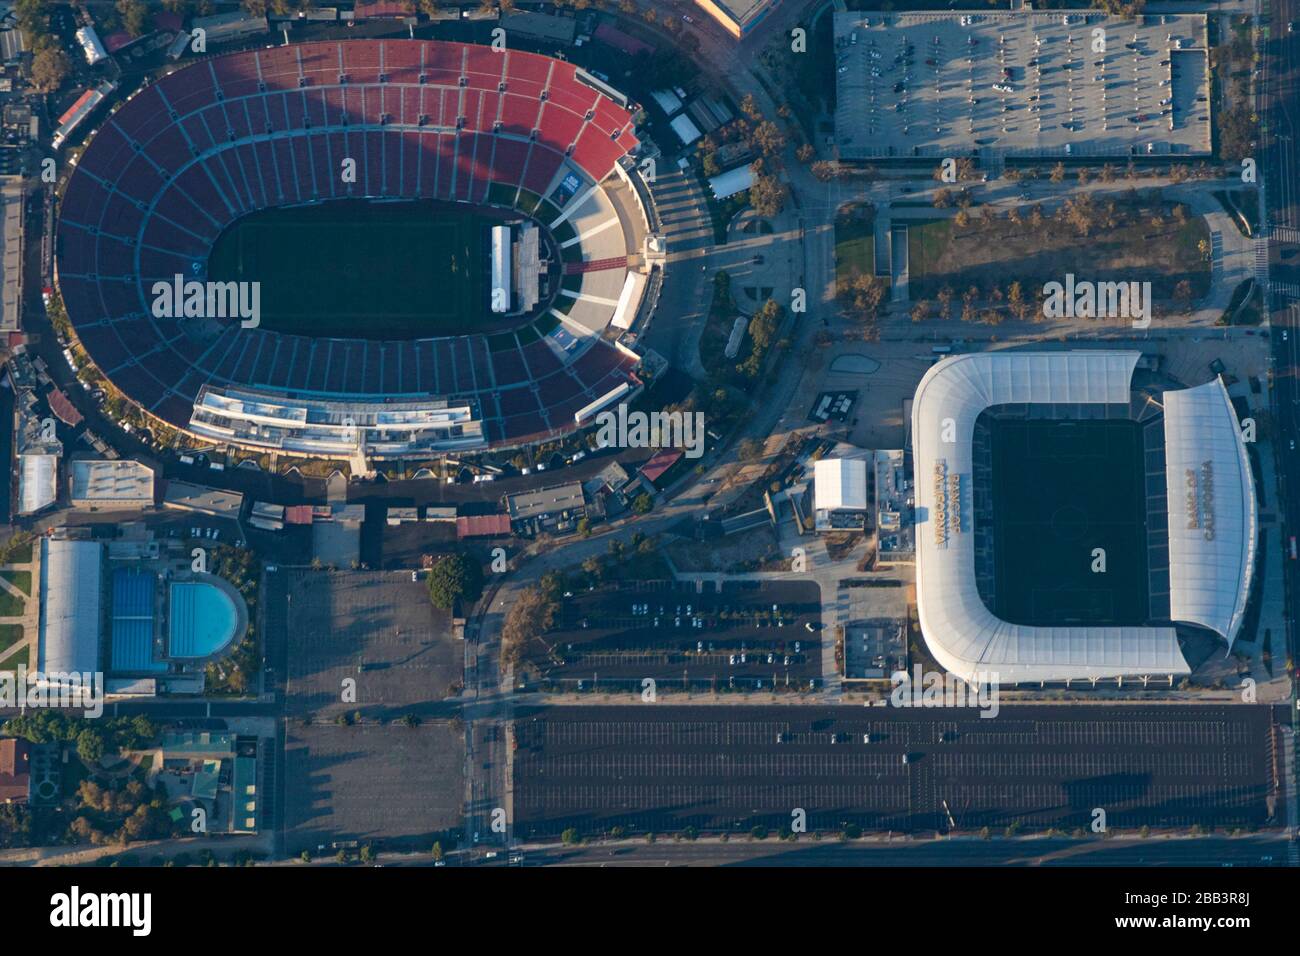 General overall aerial view of the Los Angeles Memorial Coliseum and Banc Of California Stadium during a flight around Southern California on Saturday, October 5, 2019, in Los Angeles, California, USA. (Photo by IOS/Espa-Images) Stock Photo